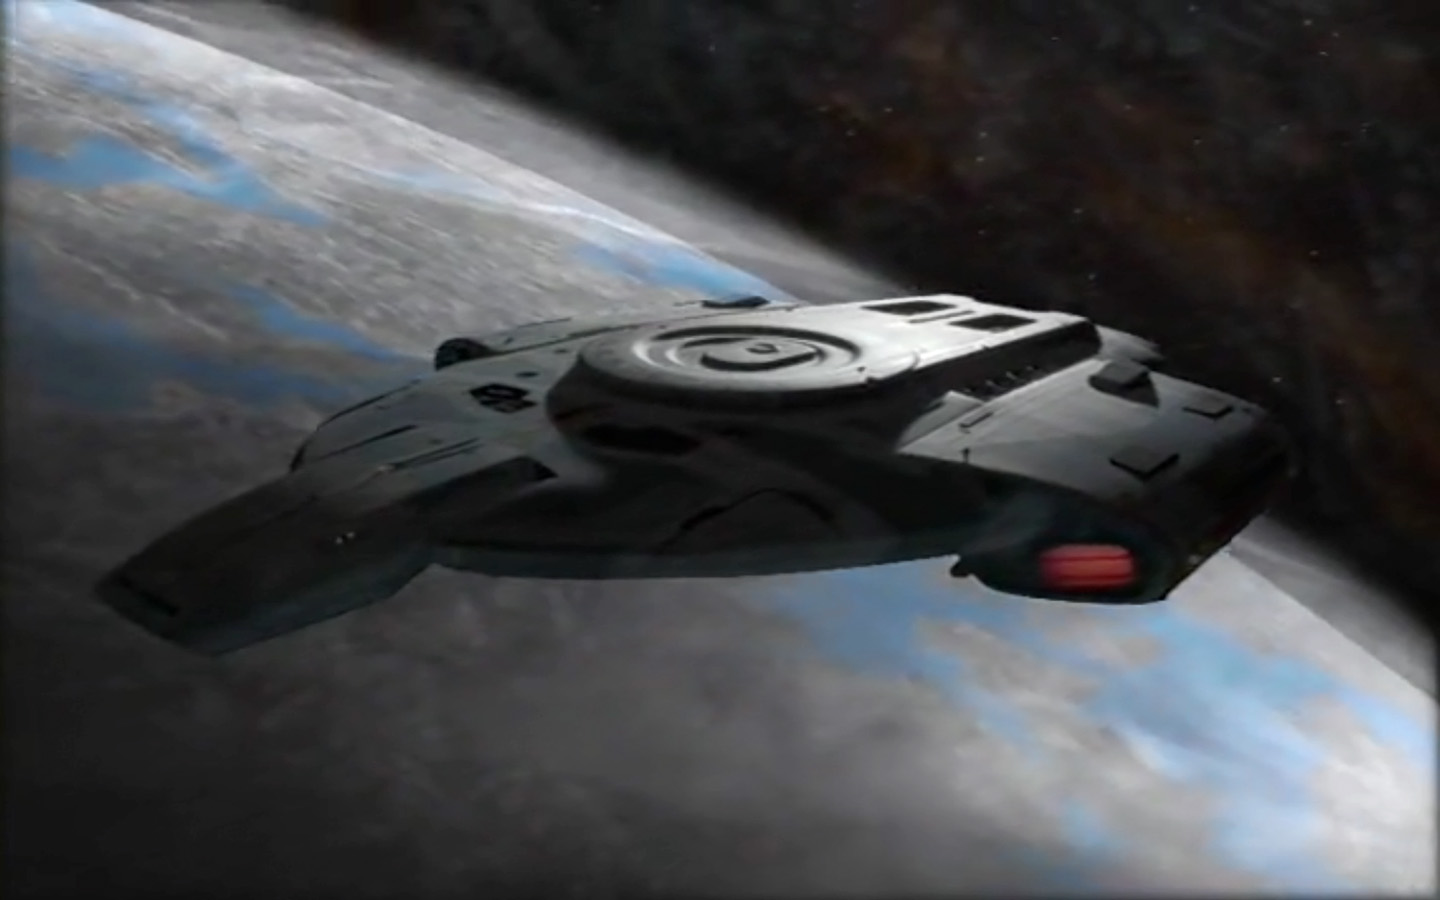 USS Defiant and Time Variance by